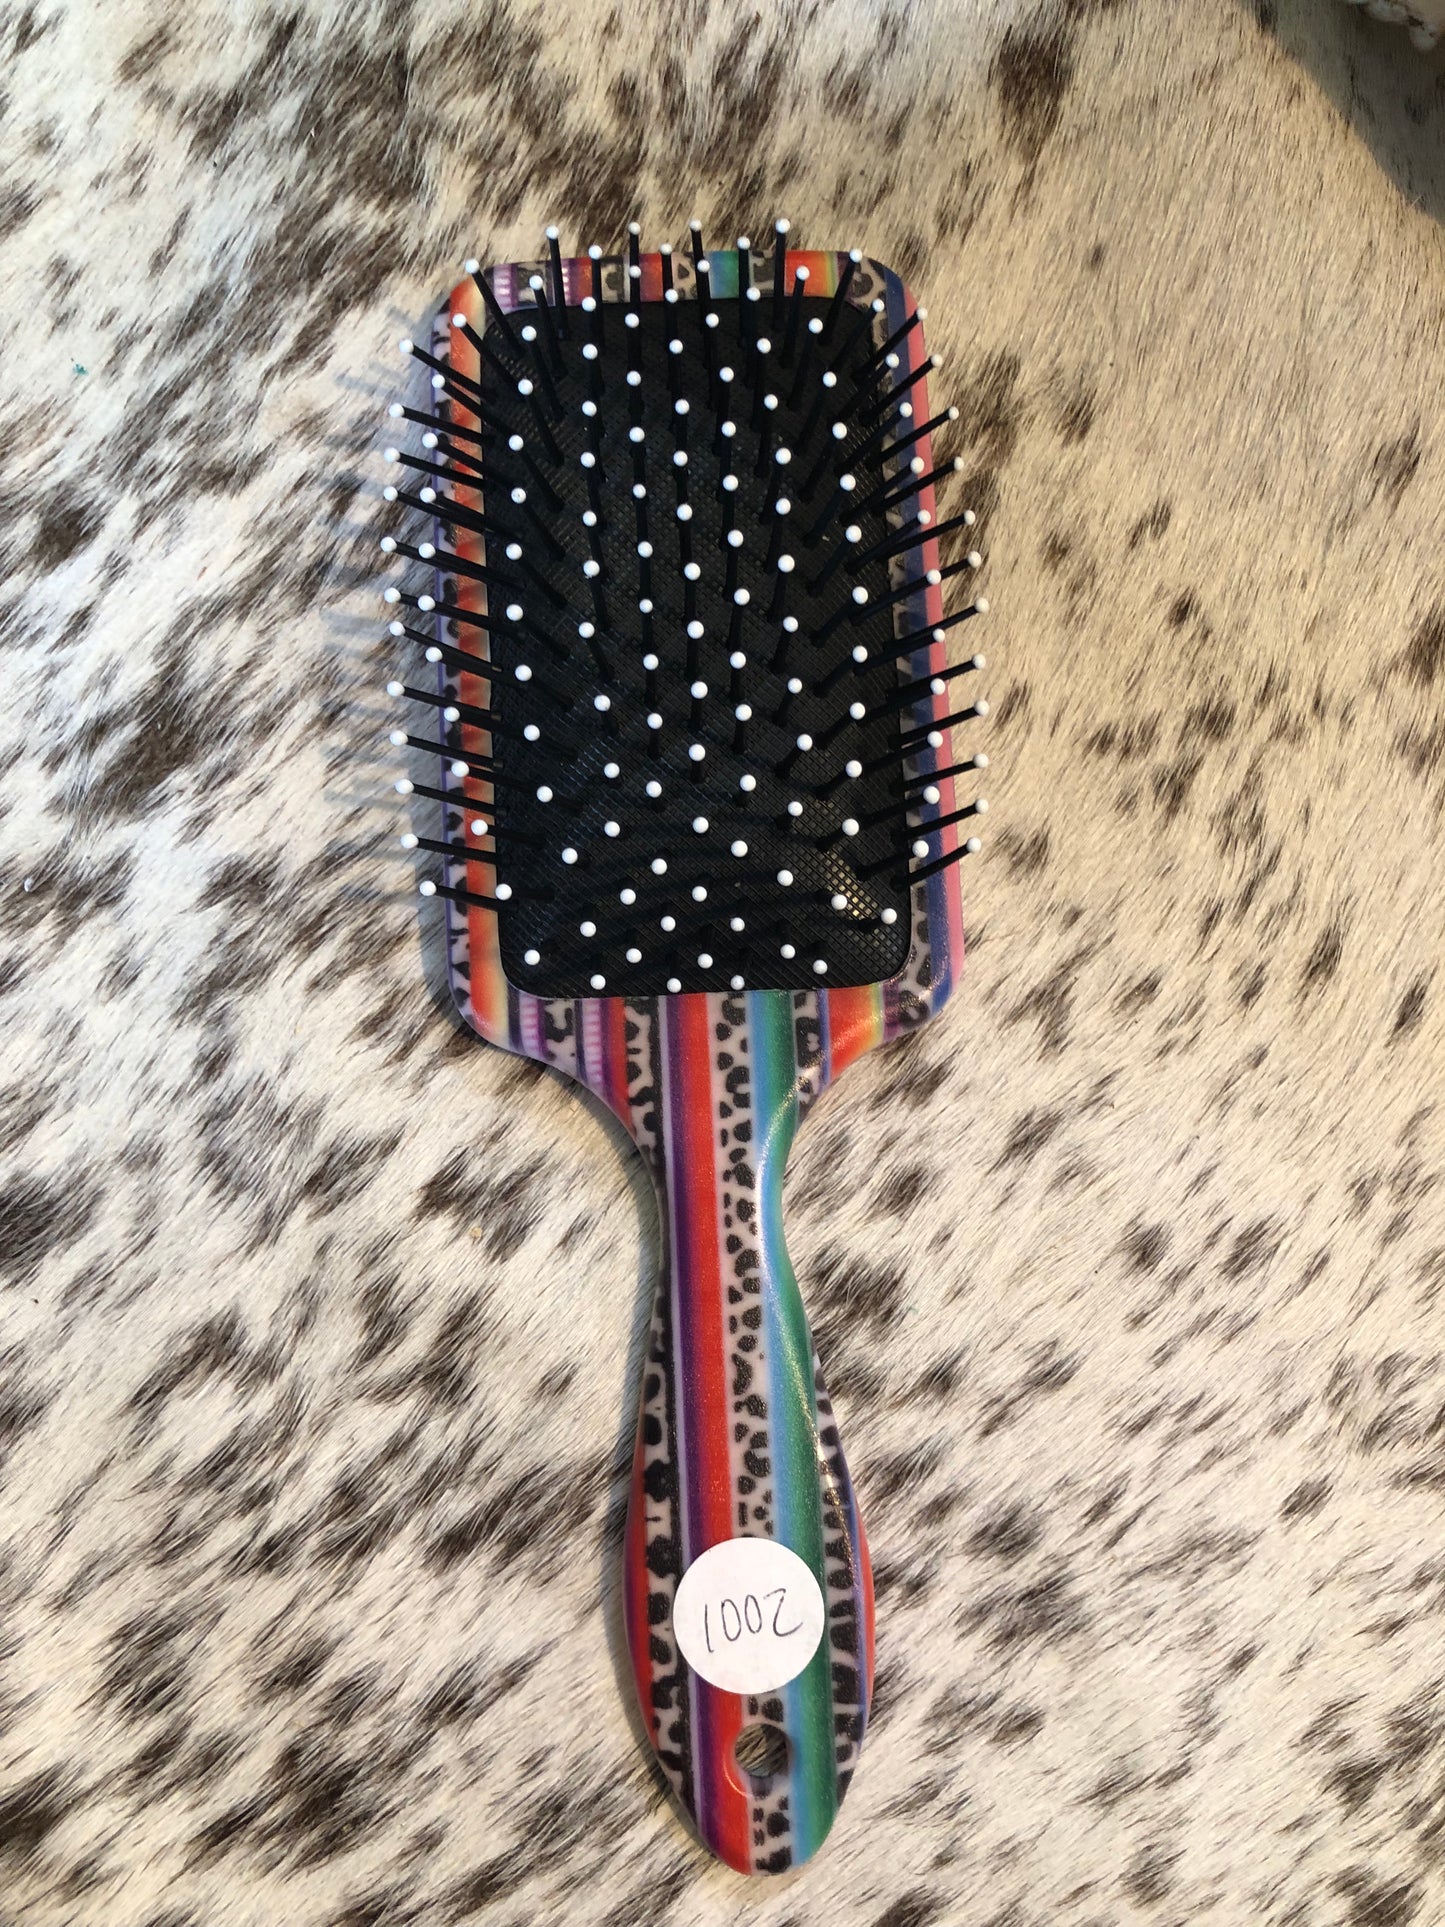 Western tooled leather floral and faux beadwork patch on serape print paddle brush